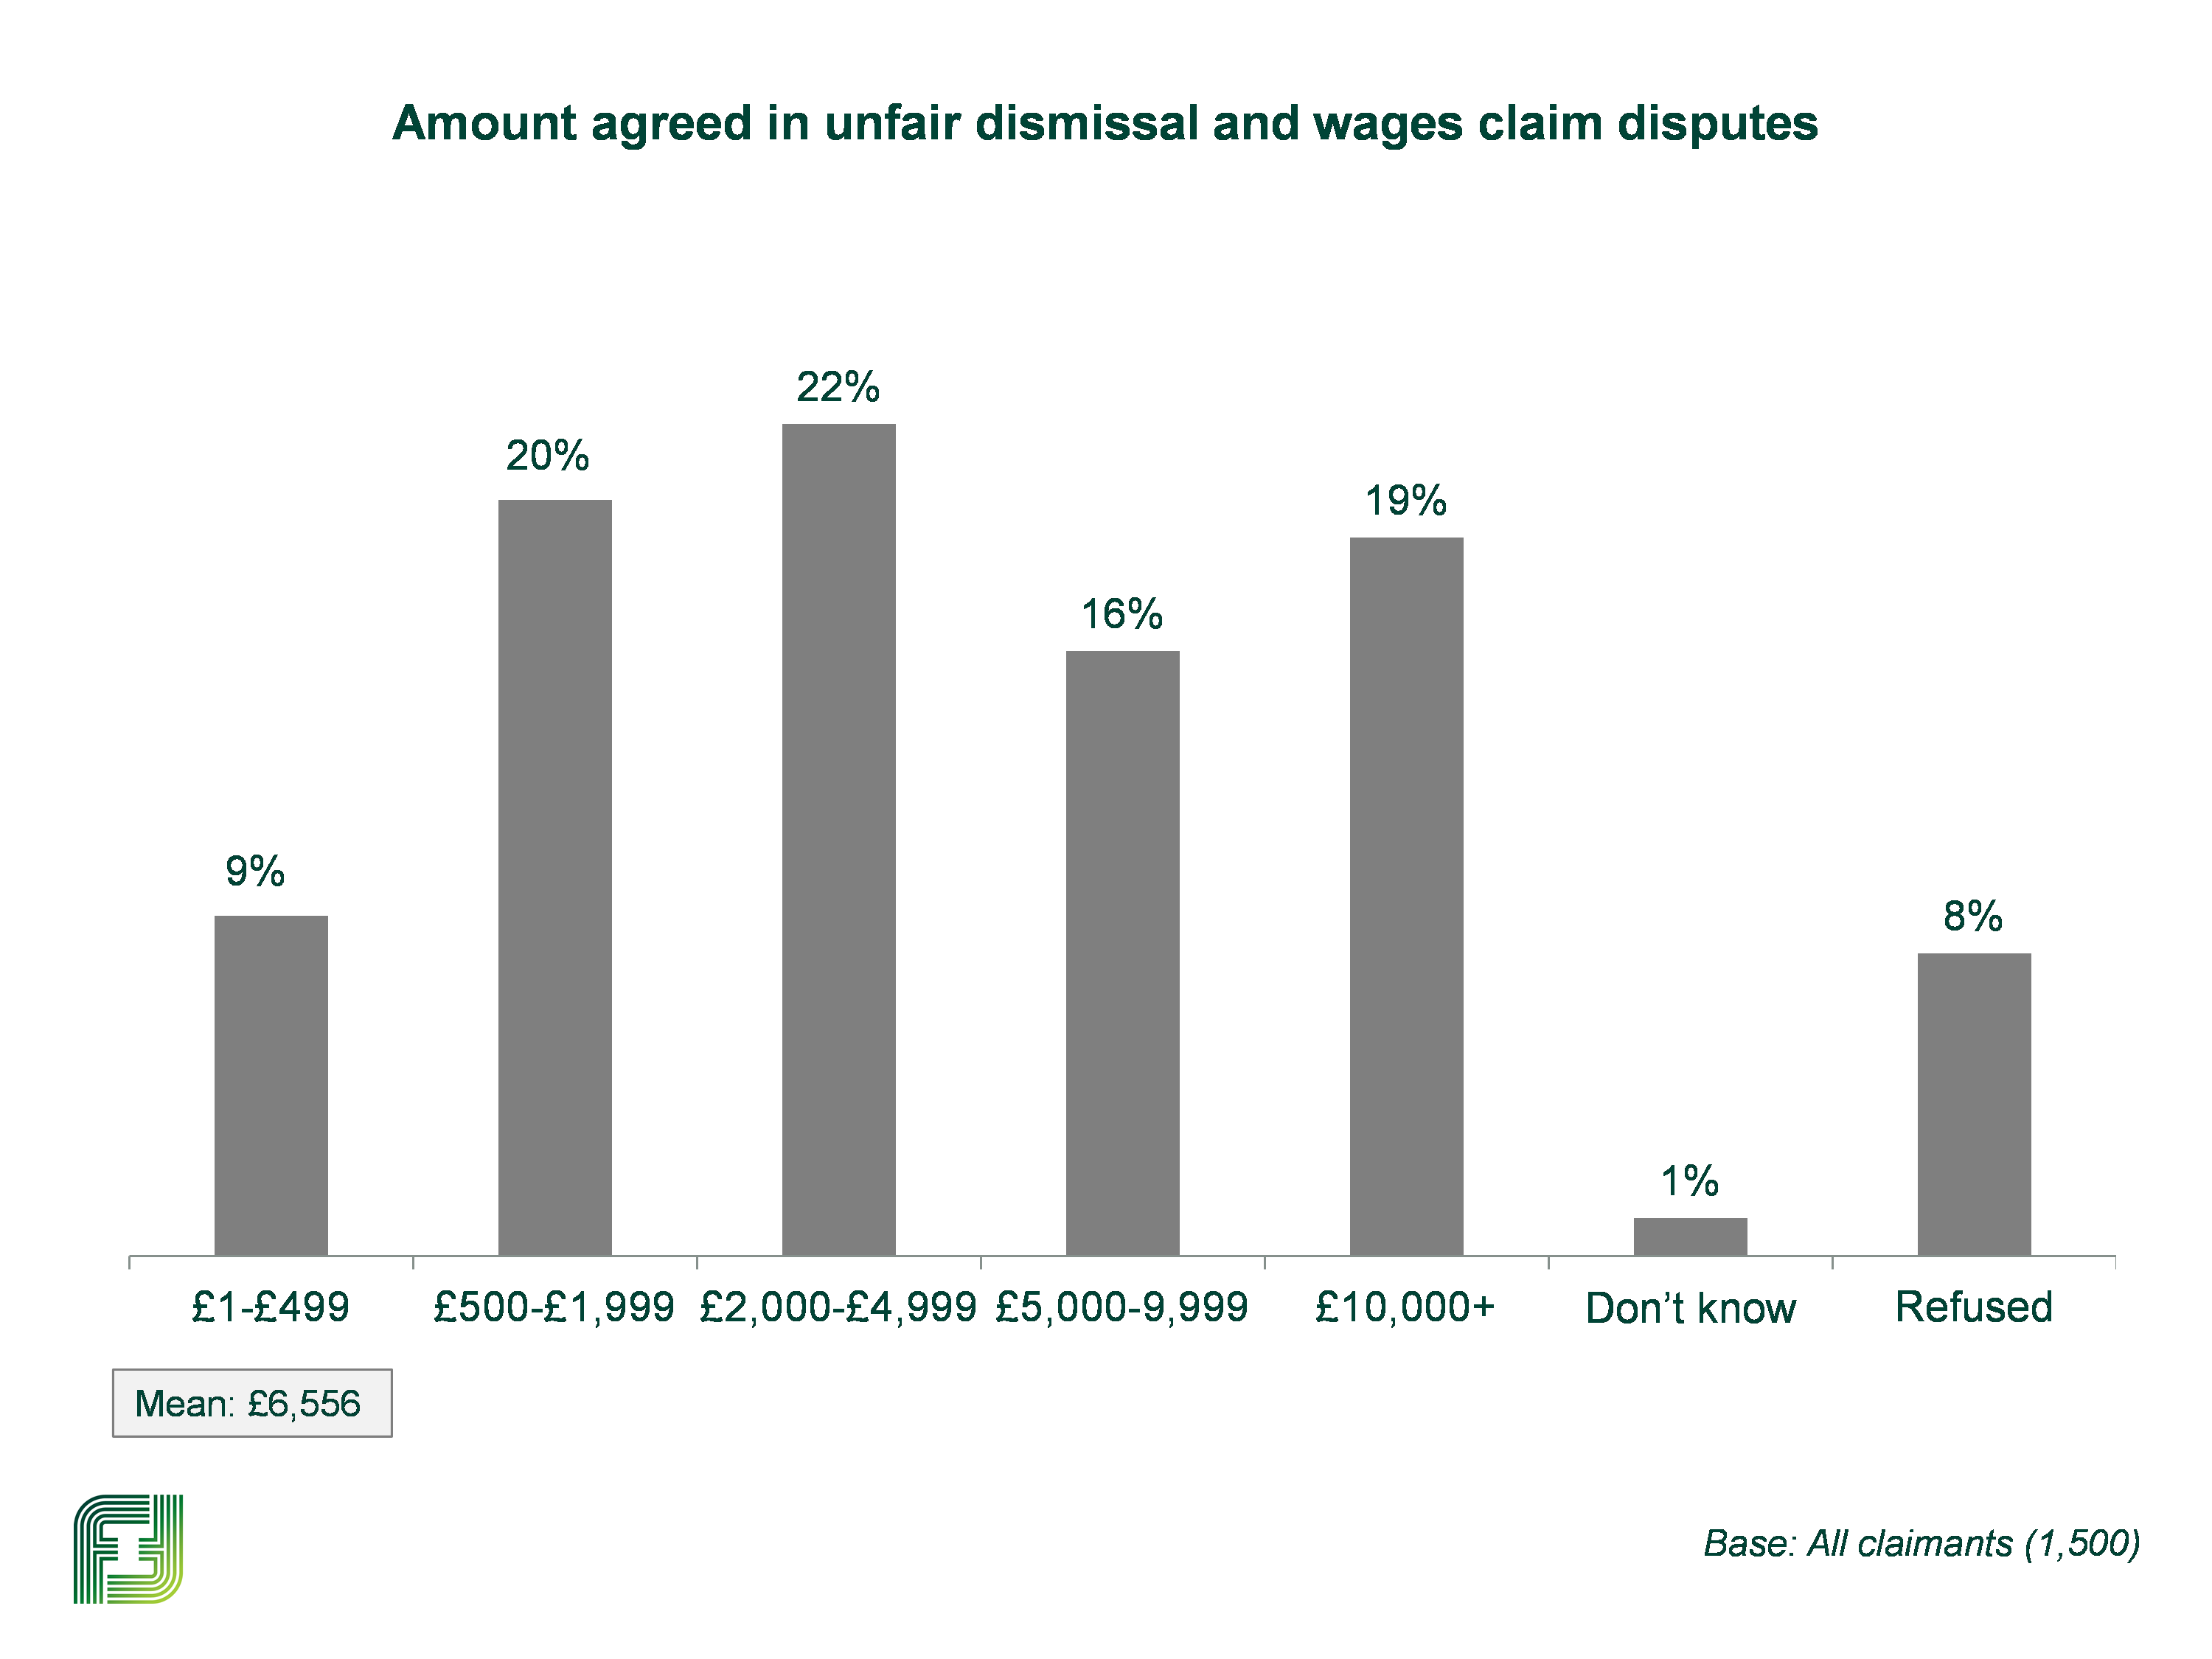 Bar chart showing that £6,556 was the mean amount agreed in unfair dismissal and wages claim disputes, but 19% of settlements were over £10,000.